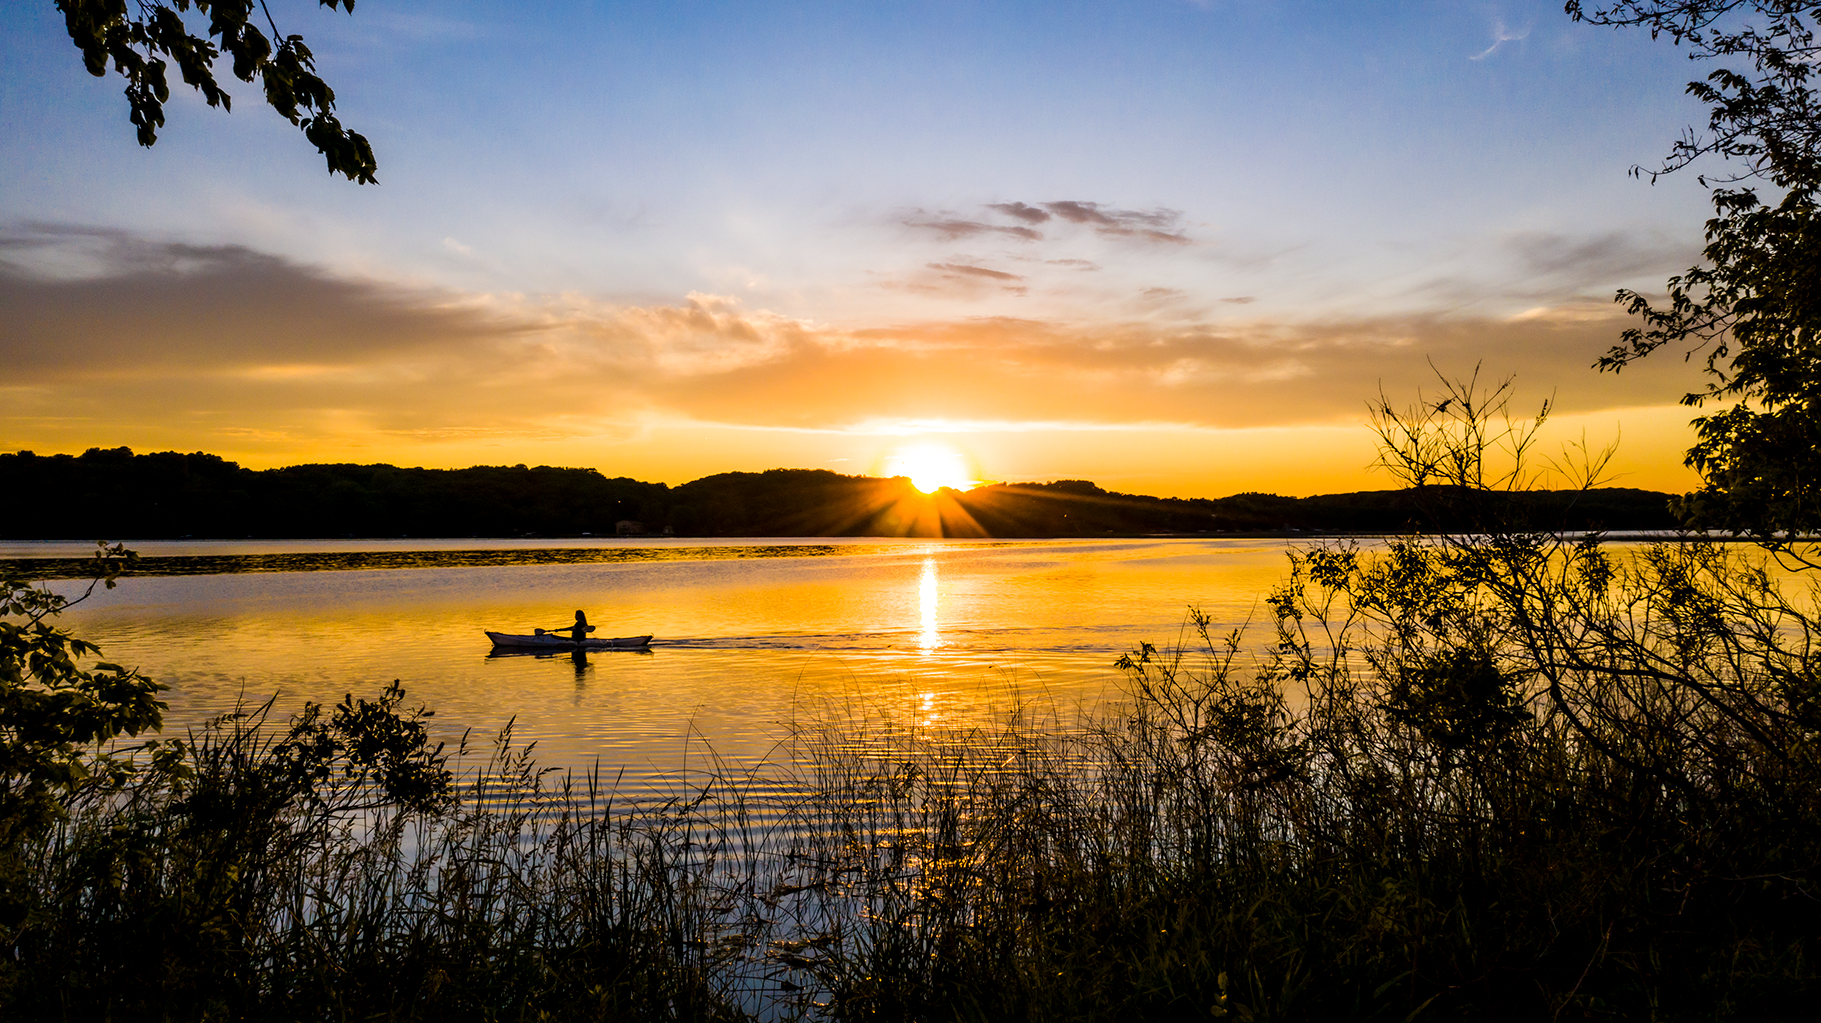 This could be your commute. Outdoor recreation opportunities abound in Otter Tail County, MN